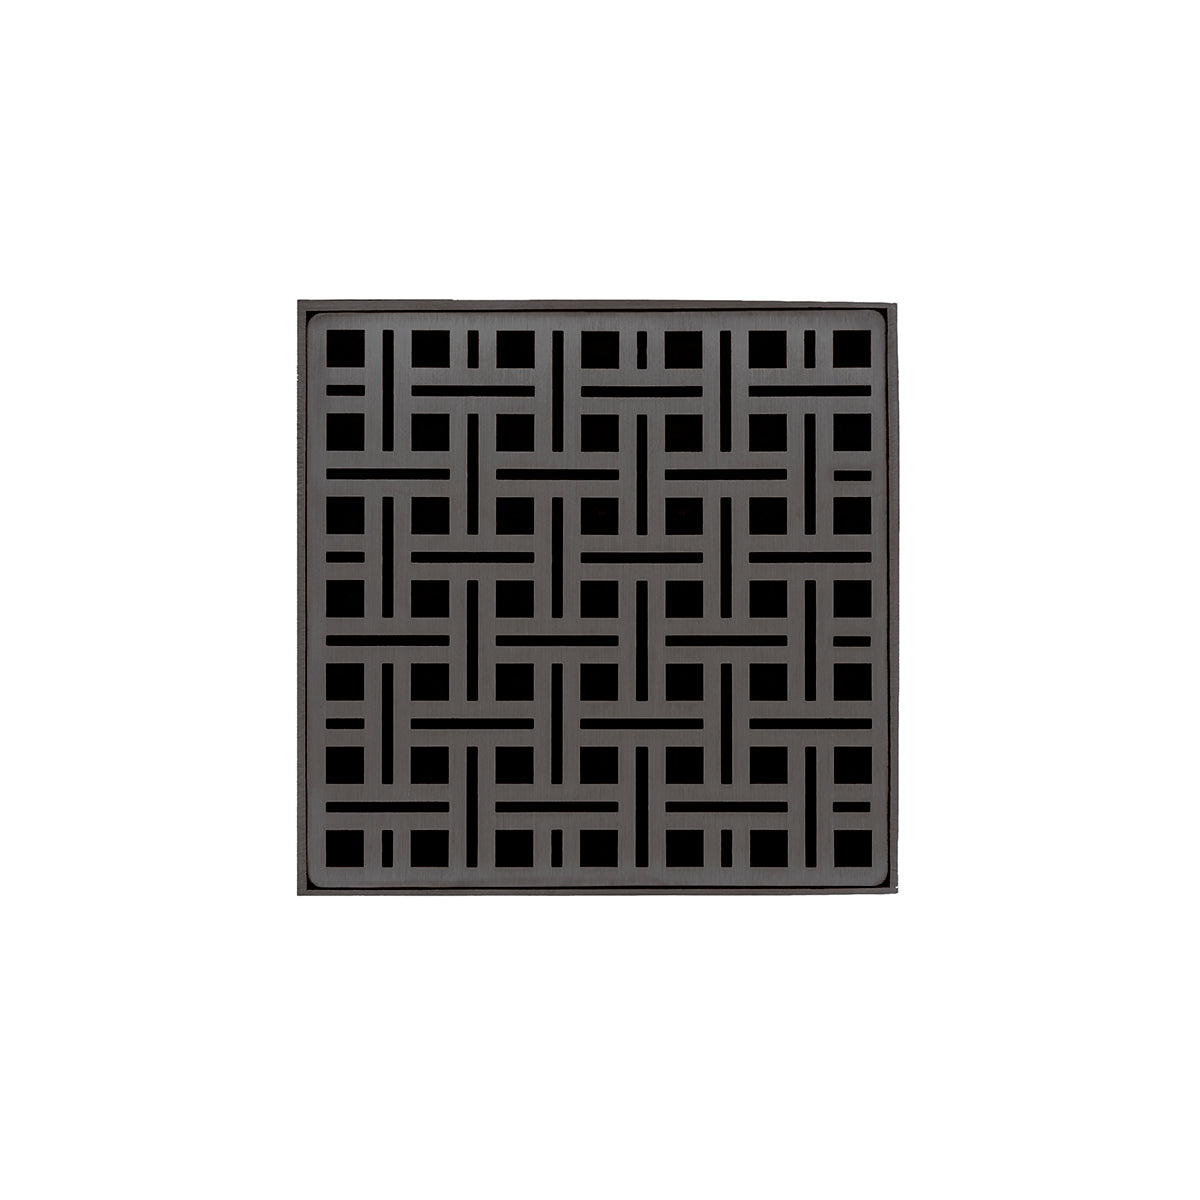 Infinity Drain 5" x 5" VDB 5 Premium Center Drain Kit with Weave Pattern Decorative Plate with Stainless Steel Bonded Flange Drain Body, 2" No Hub Outlet